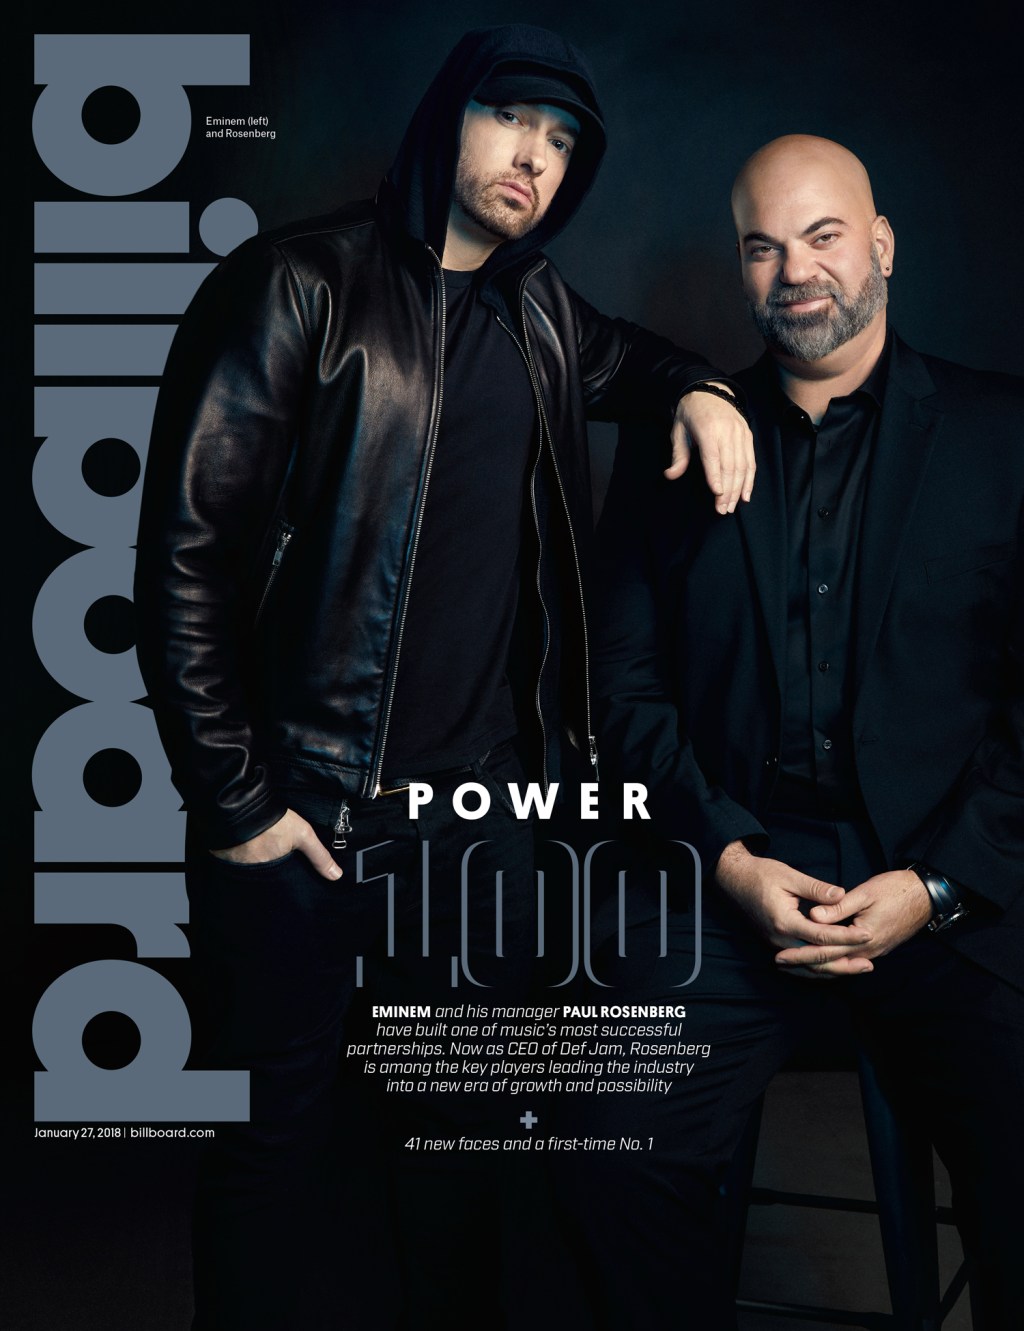 Uncovering The Dynamic Relationship Between Eminem And His Manager, Paul Rosenberg